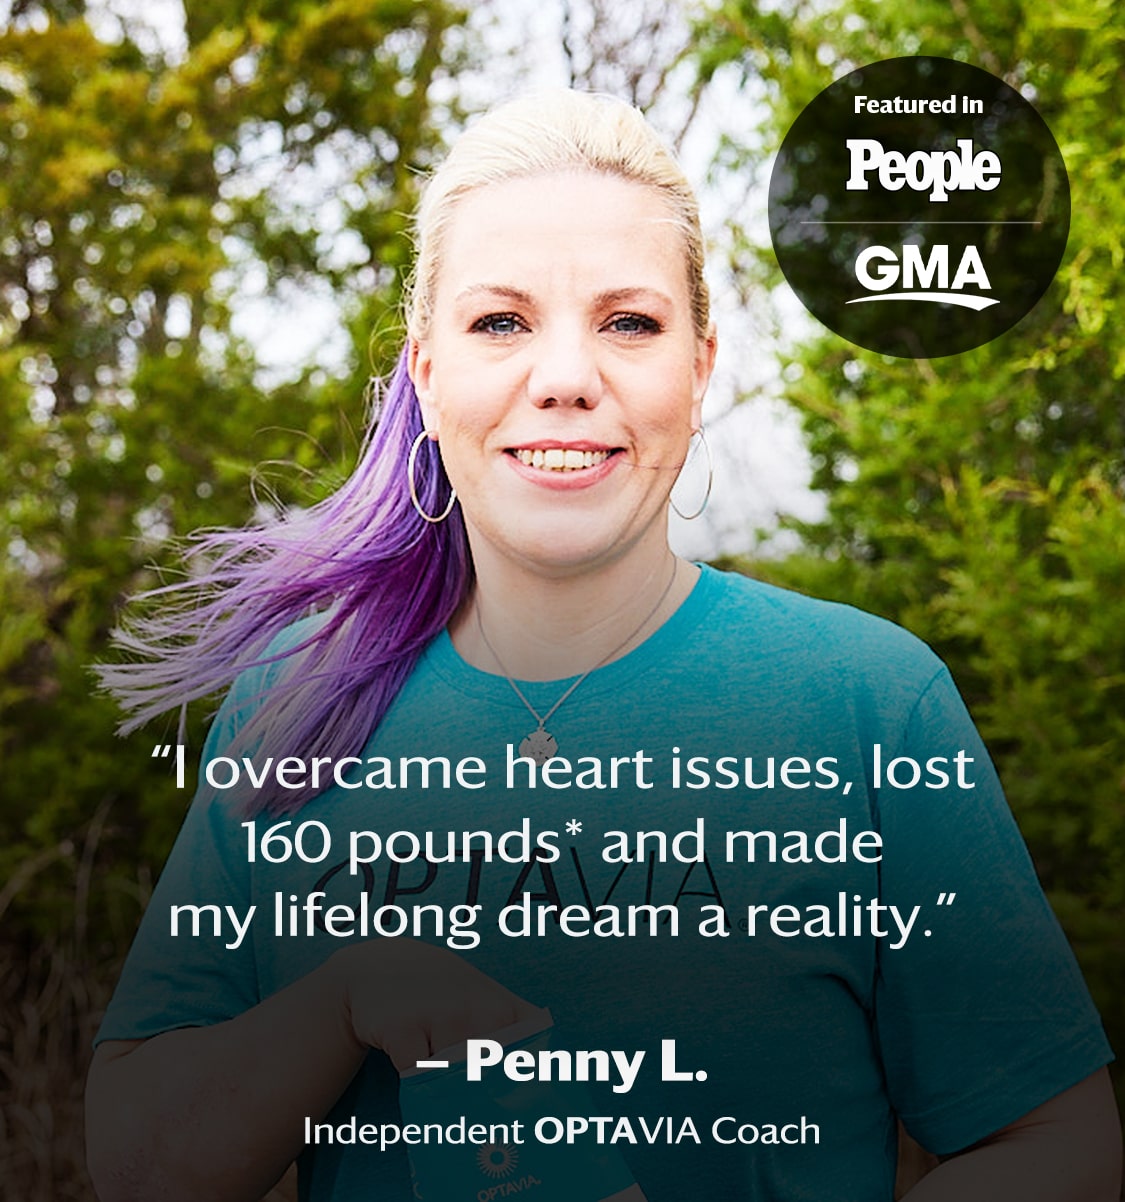 I overcame heart issues, lost 160 pounds and made my lifelong dream a reality. Penny L., Independent Optavia Coach.